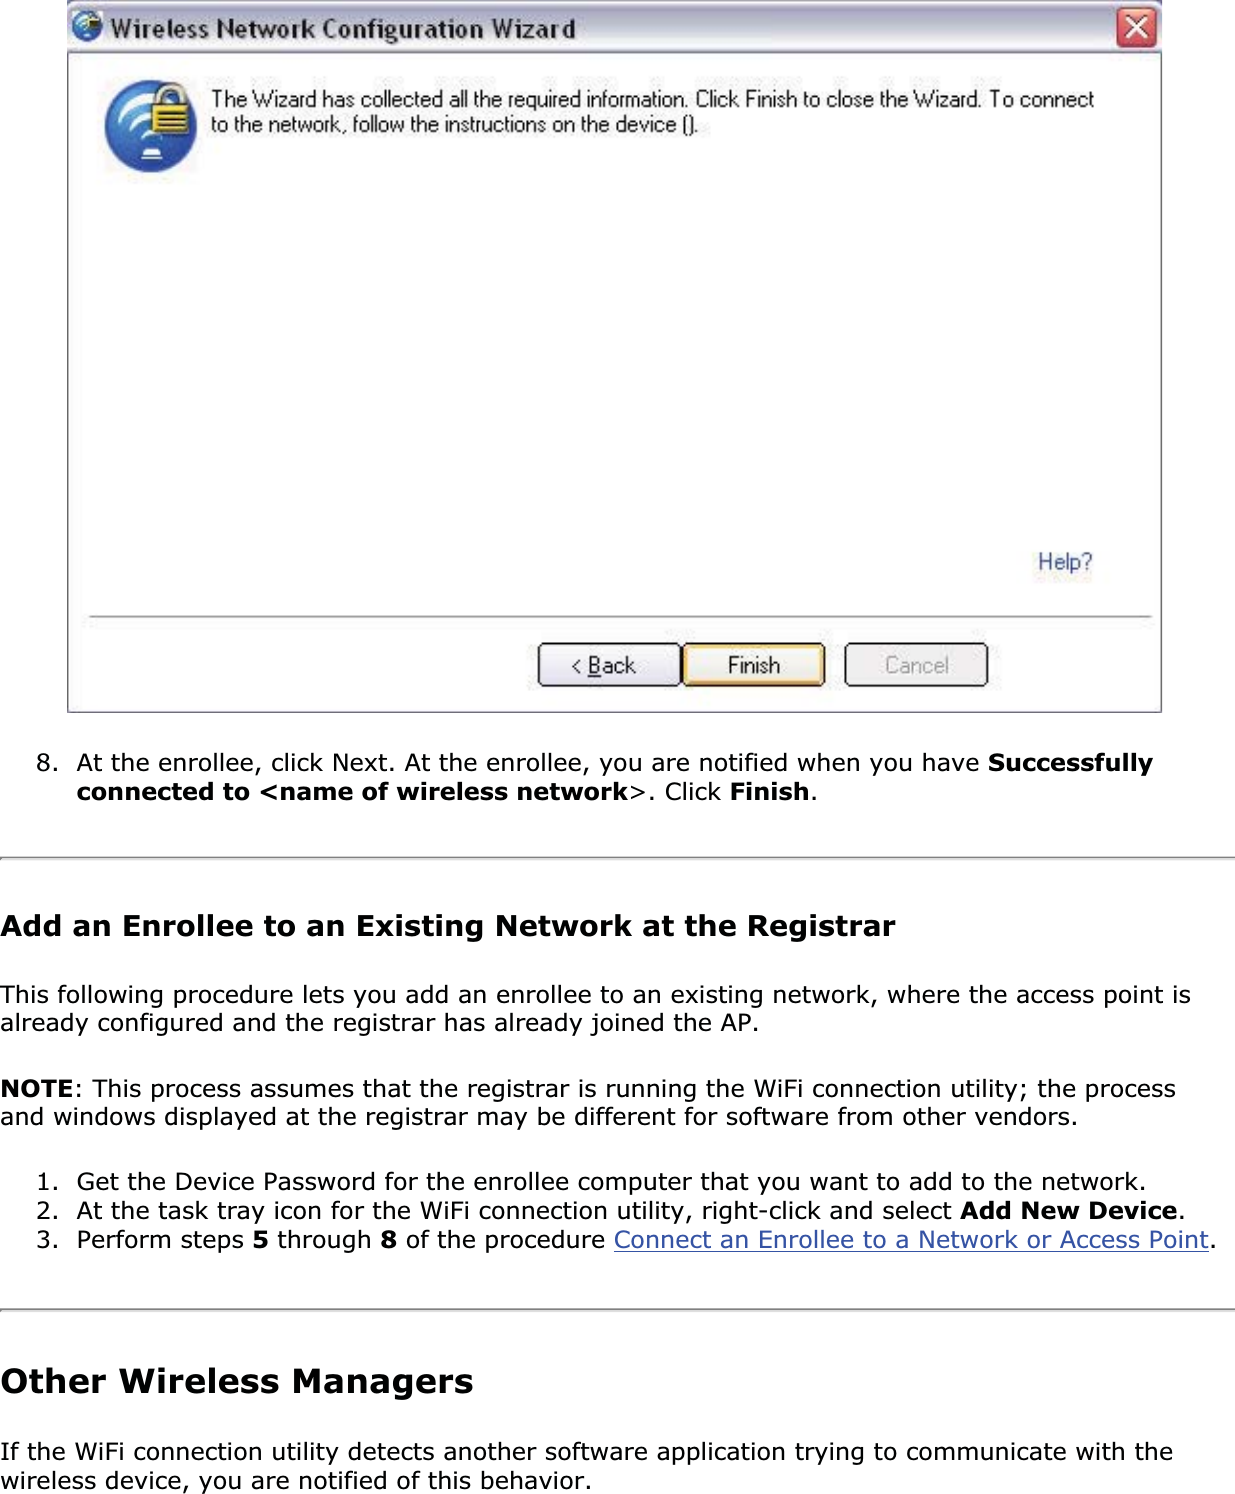 8. At the enrollee, click Next. At the enrollee, you are notified when you have Successfullyconnected to &lt;name of wireless network&gt;. Click Finish.Add an Enrollee to an Existing Network at the RegistrarThis following procedure lets you add an enrollee to an existing network, where the access point is already configured and the registrar has already joined the AP. NOTE: This process assumes that the registrar is running the WiFi connection utility; the process and windows displayed at the registrar may be different for software from other vendors. 1. Get the Device Password for the enrollee computer that you want to add to the network. 2. At the task tray icon for the WiFi connection utility, right-click and select Add New Device.3. Perform steps 5 through 8 of the procedure Connect an Enrollee to a Network or Access Point.Other Wireless ManagersIf the WiFi connection utility detects another software application trying to communicate with the wireless device, you are notified of this behavior. 